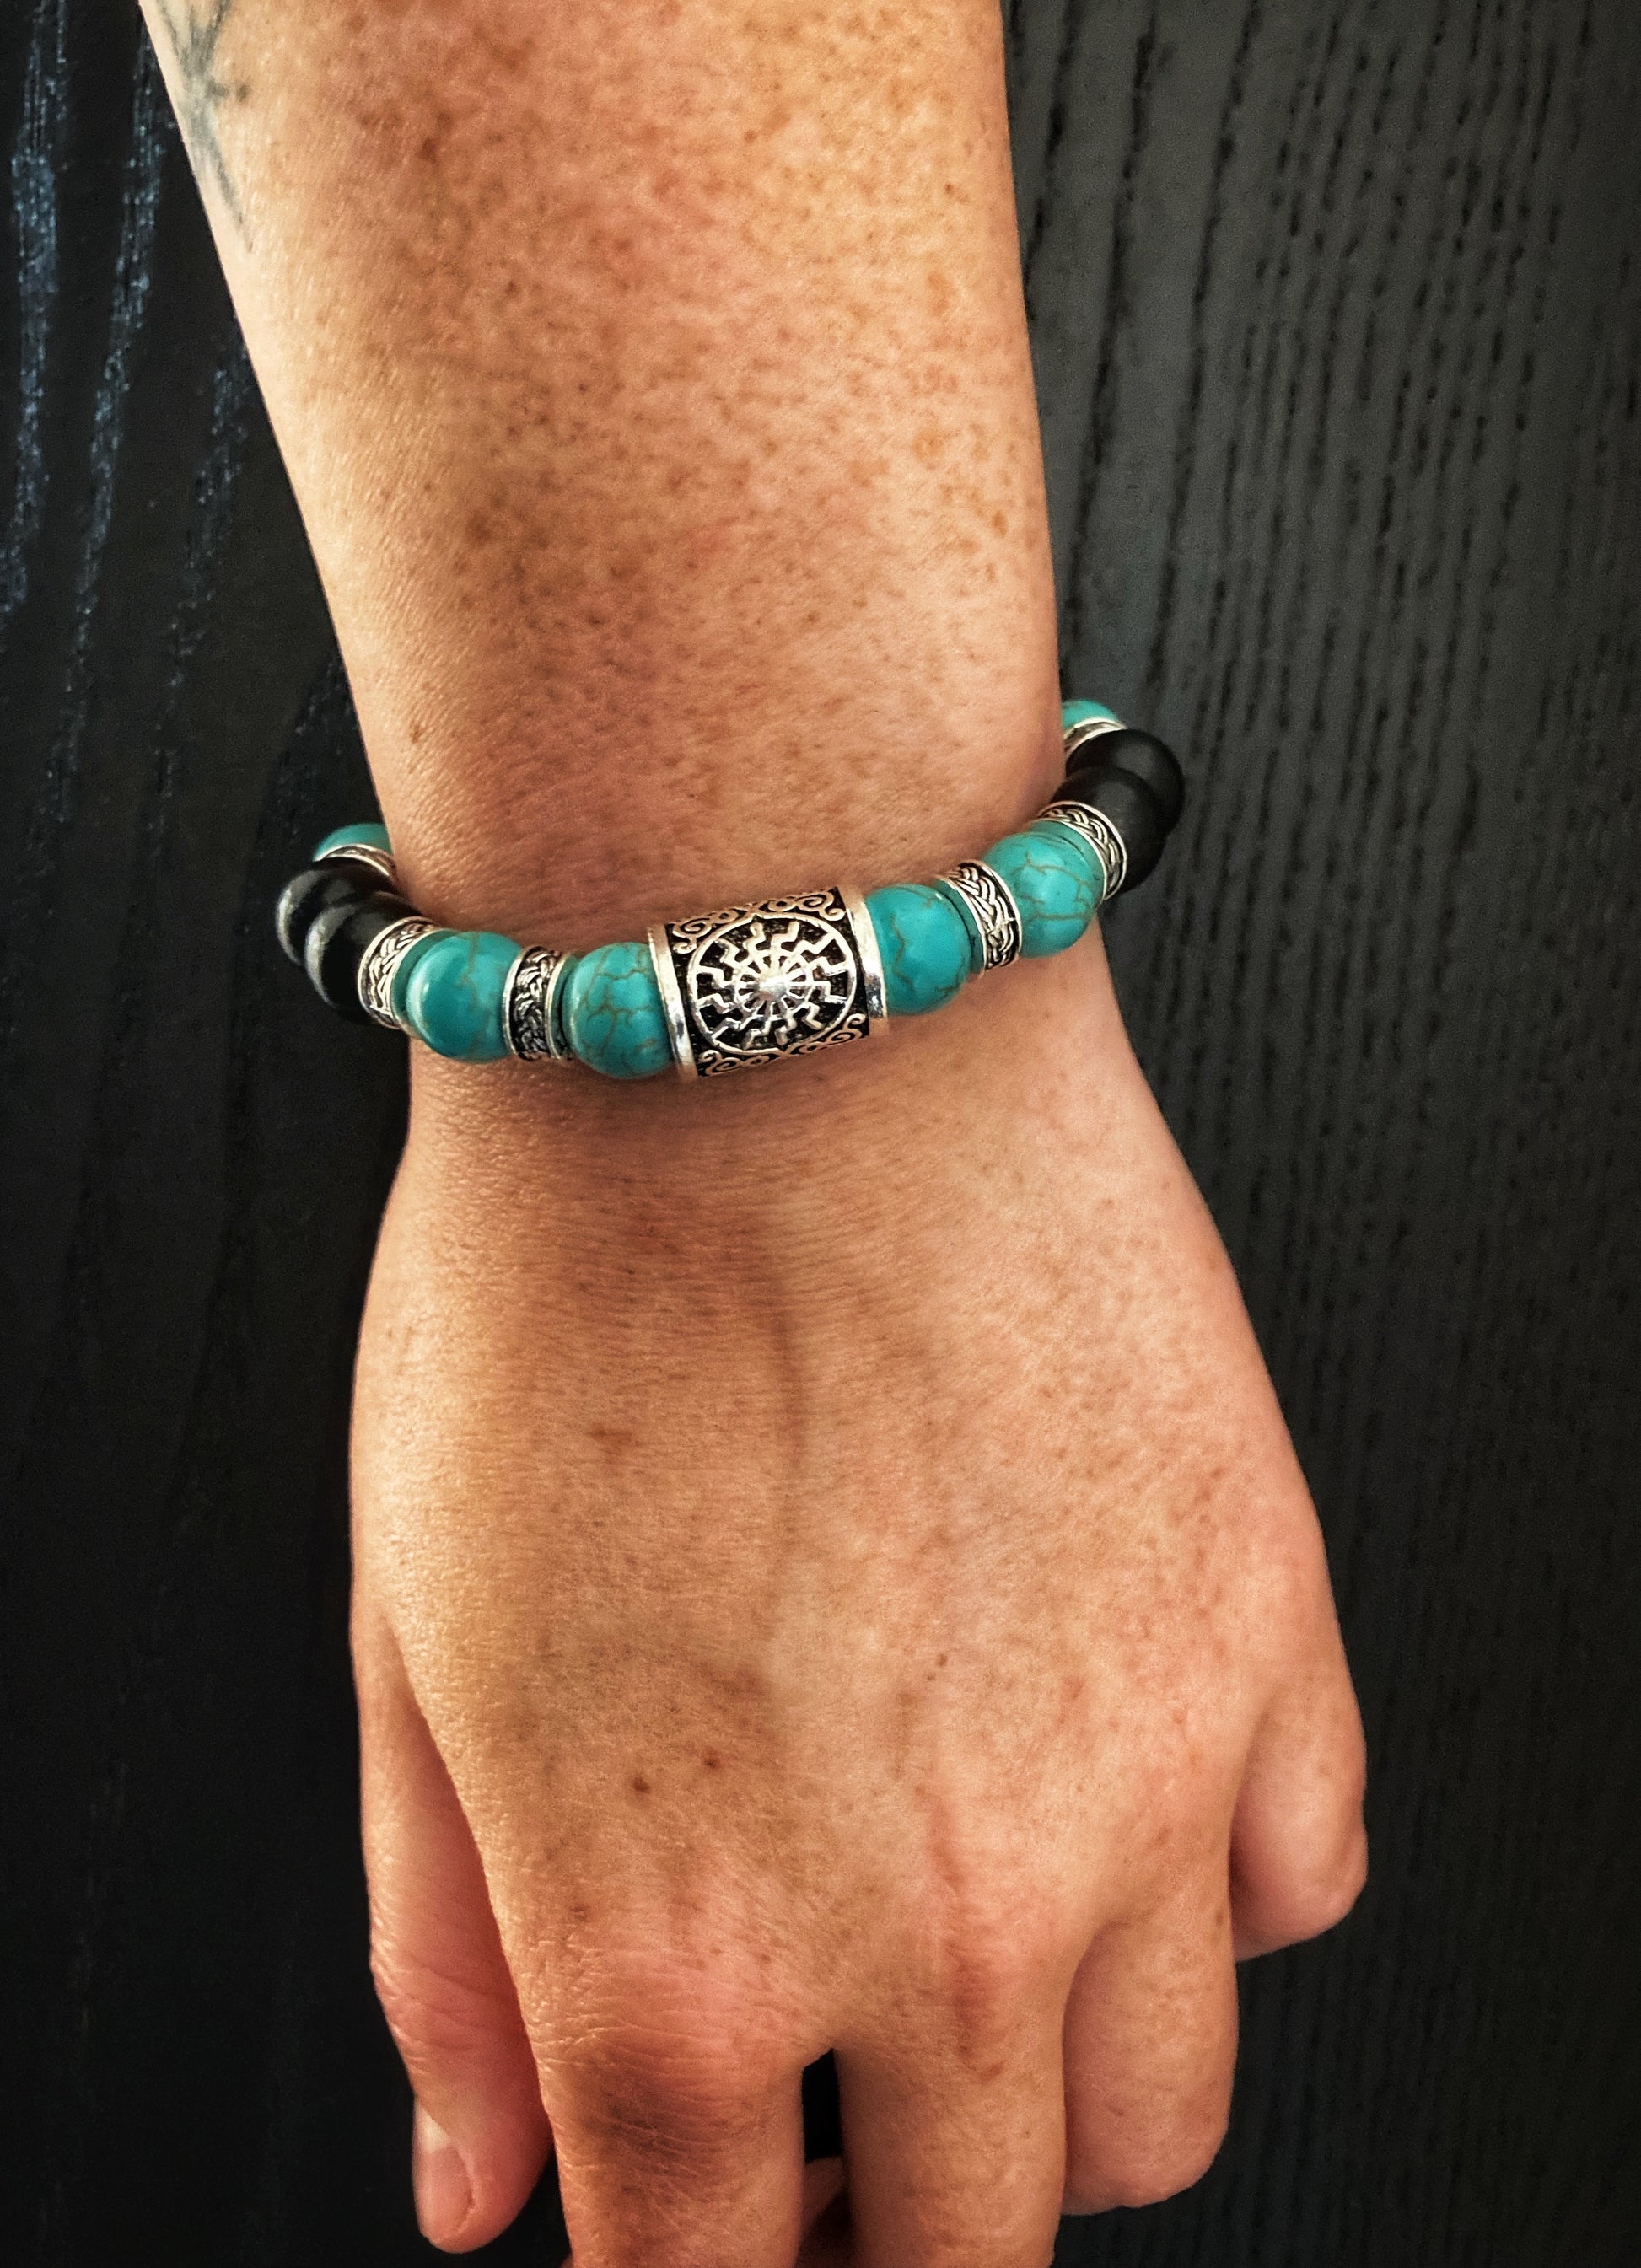 A arm dangles showing off a bracelet on the wrist. You can see the shiny silver coloured rune with a black sun symbol engraved onto it and the patterned thin metal ring pieces that seperate the beads.